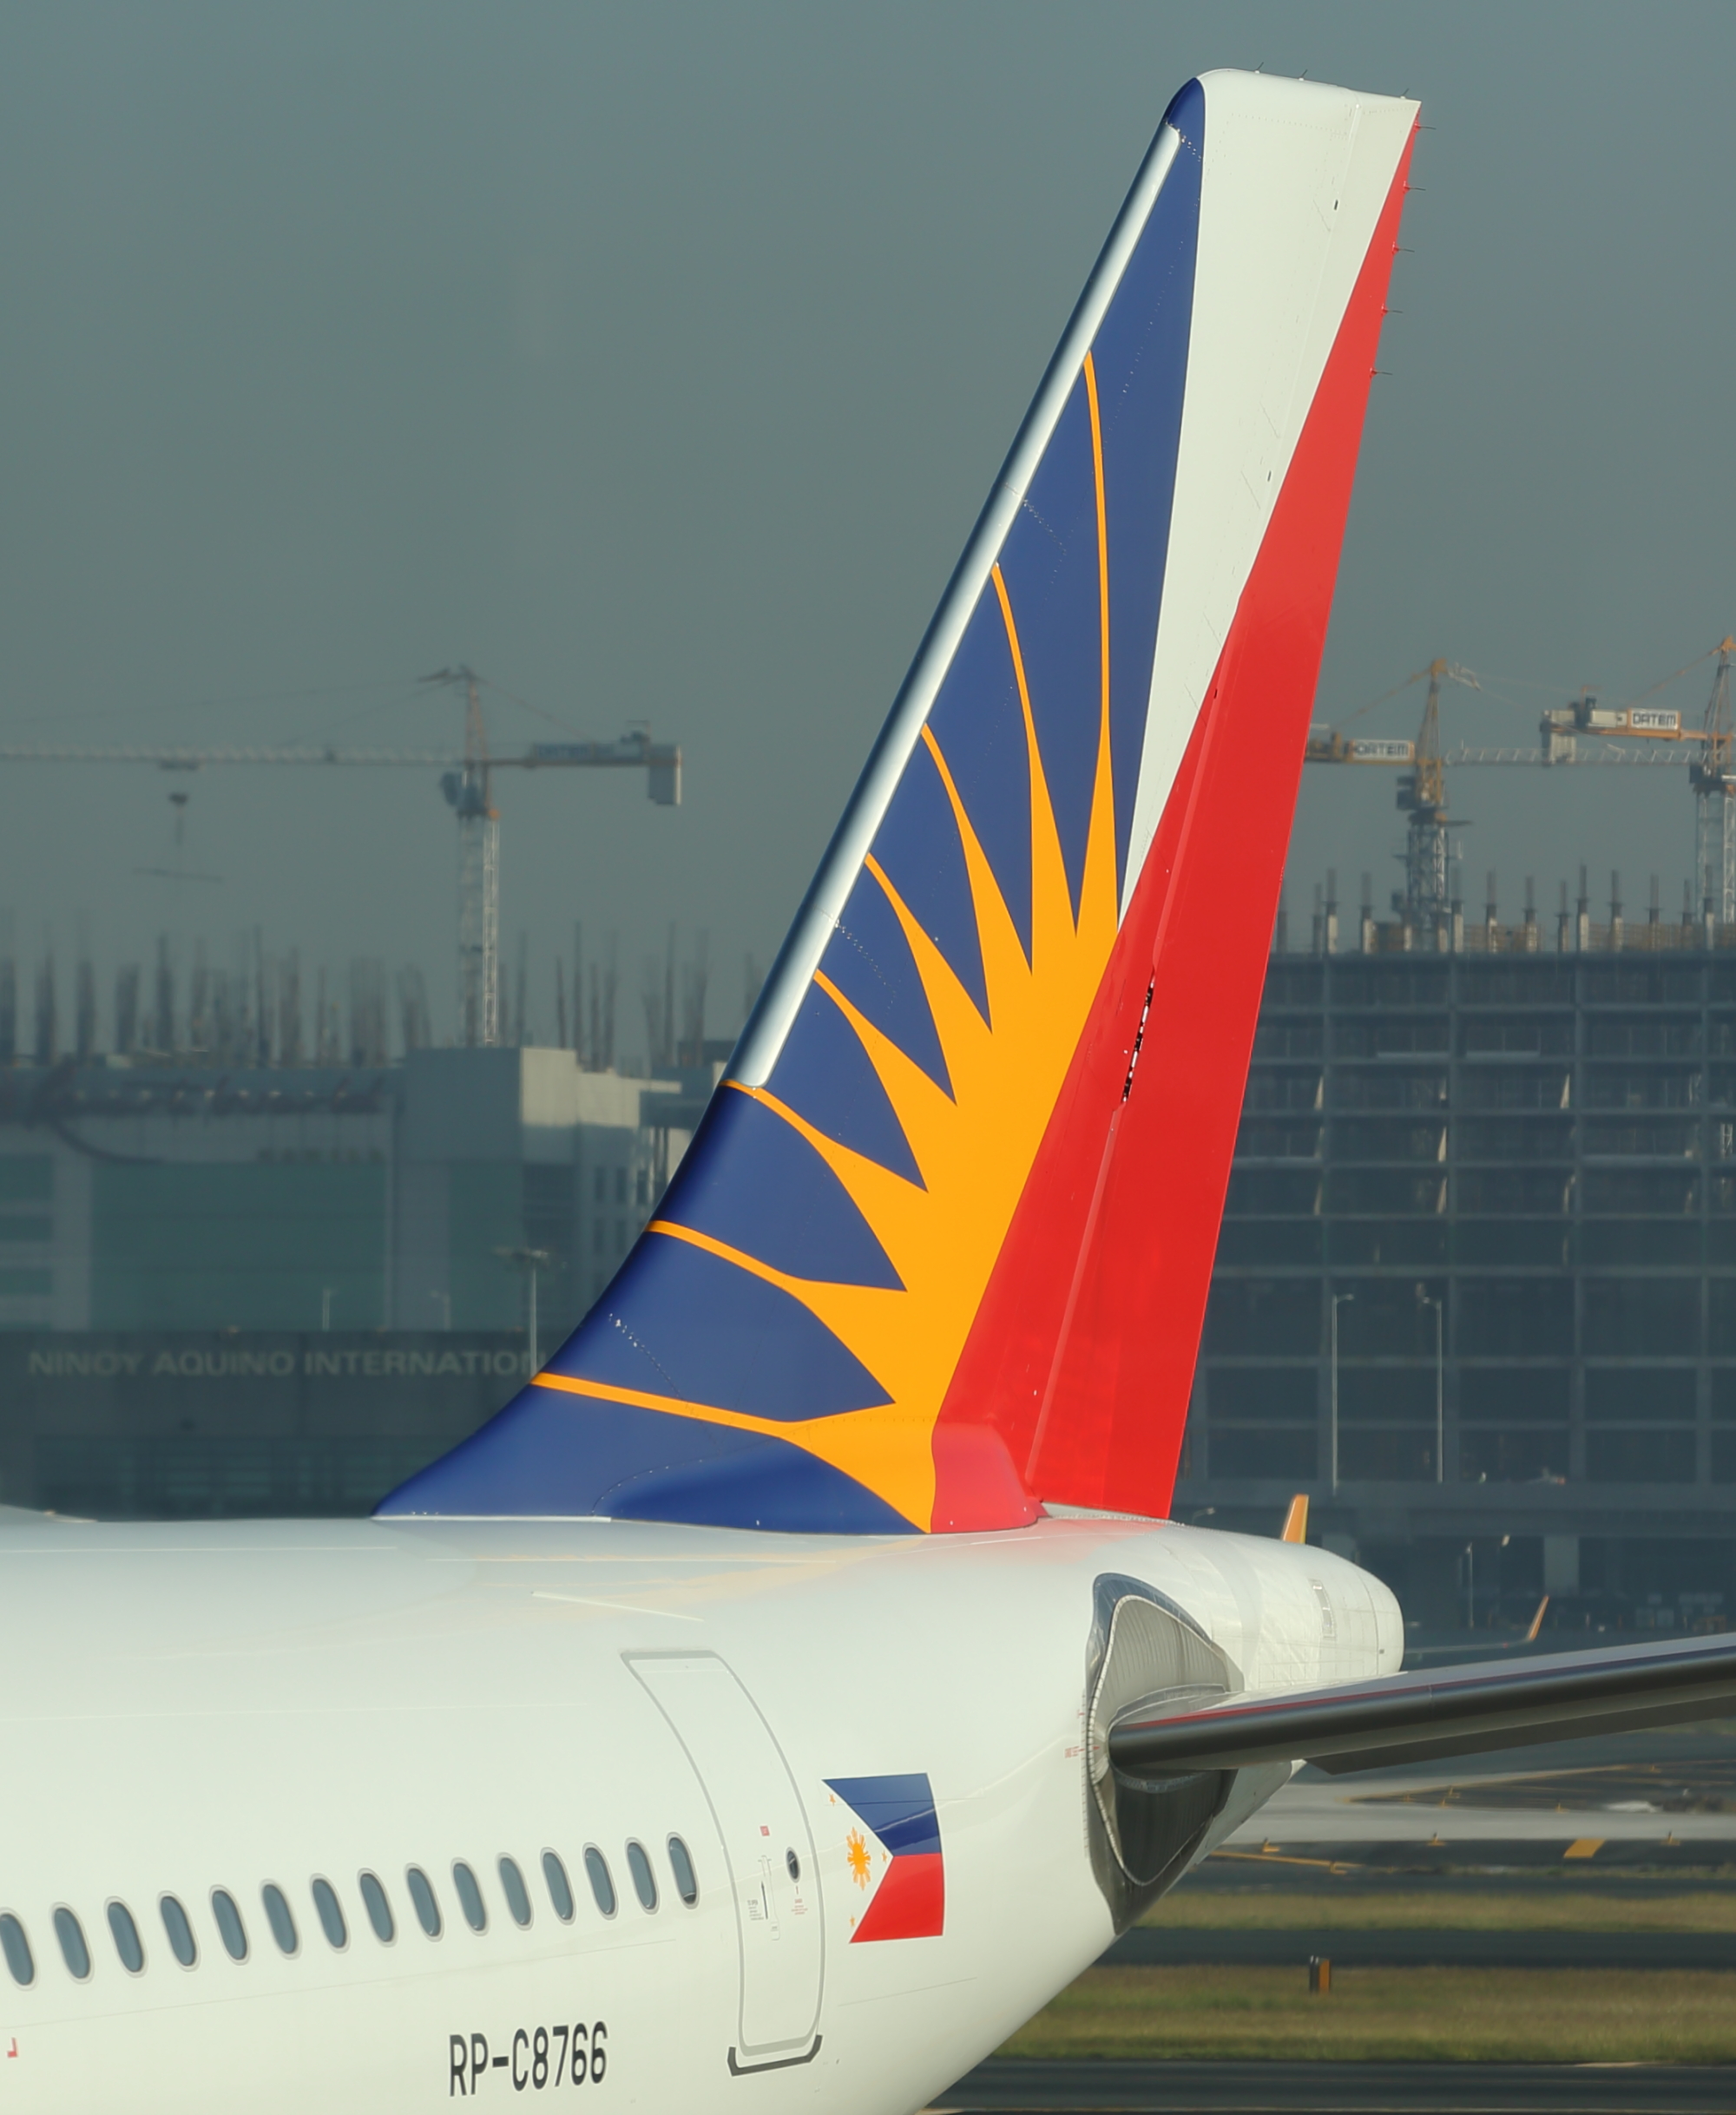 Sun shining on tail fin of Philippine Airlines aircraft in Manila, Philippines